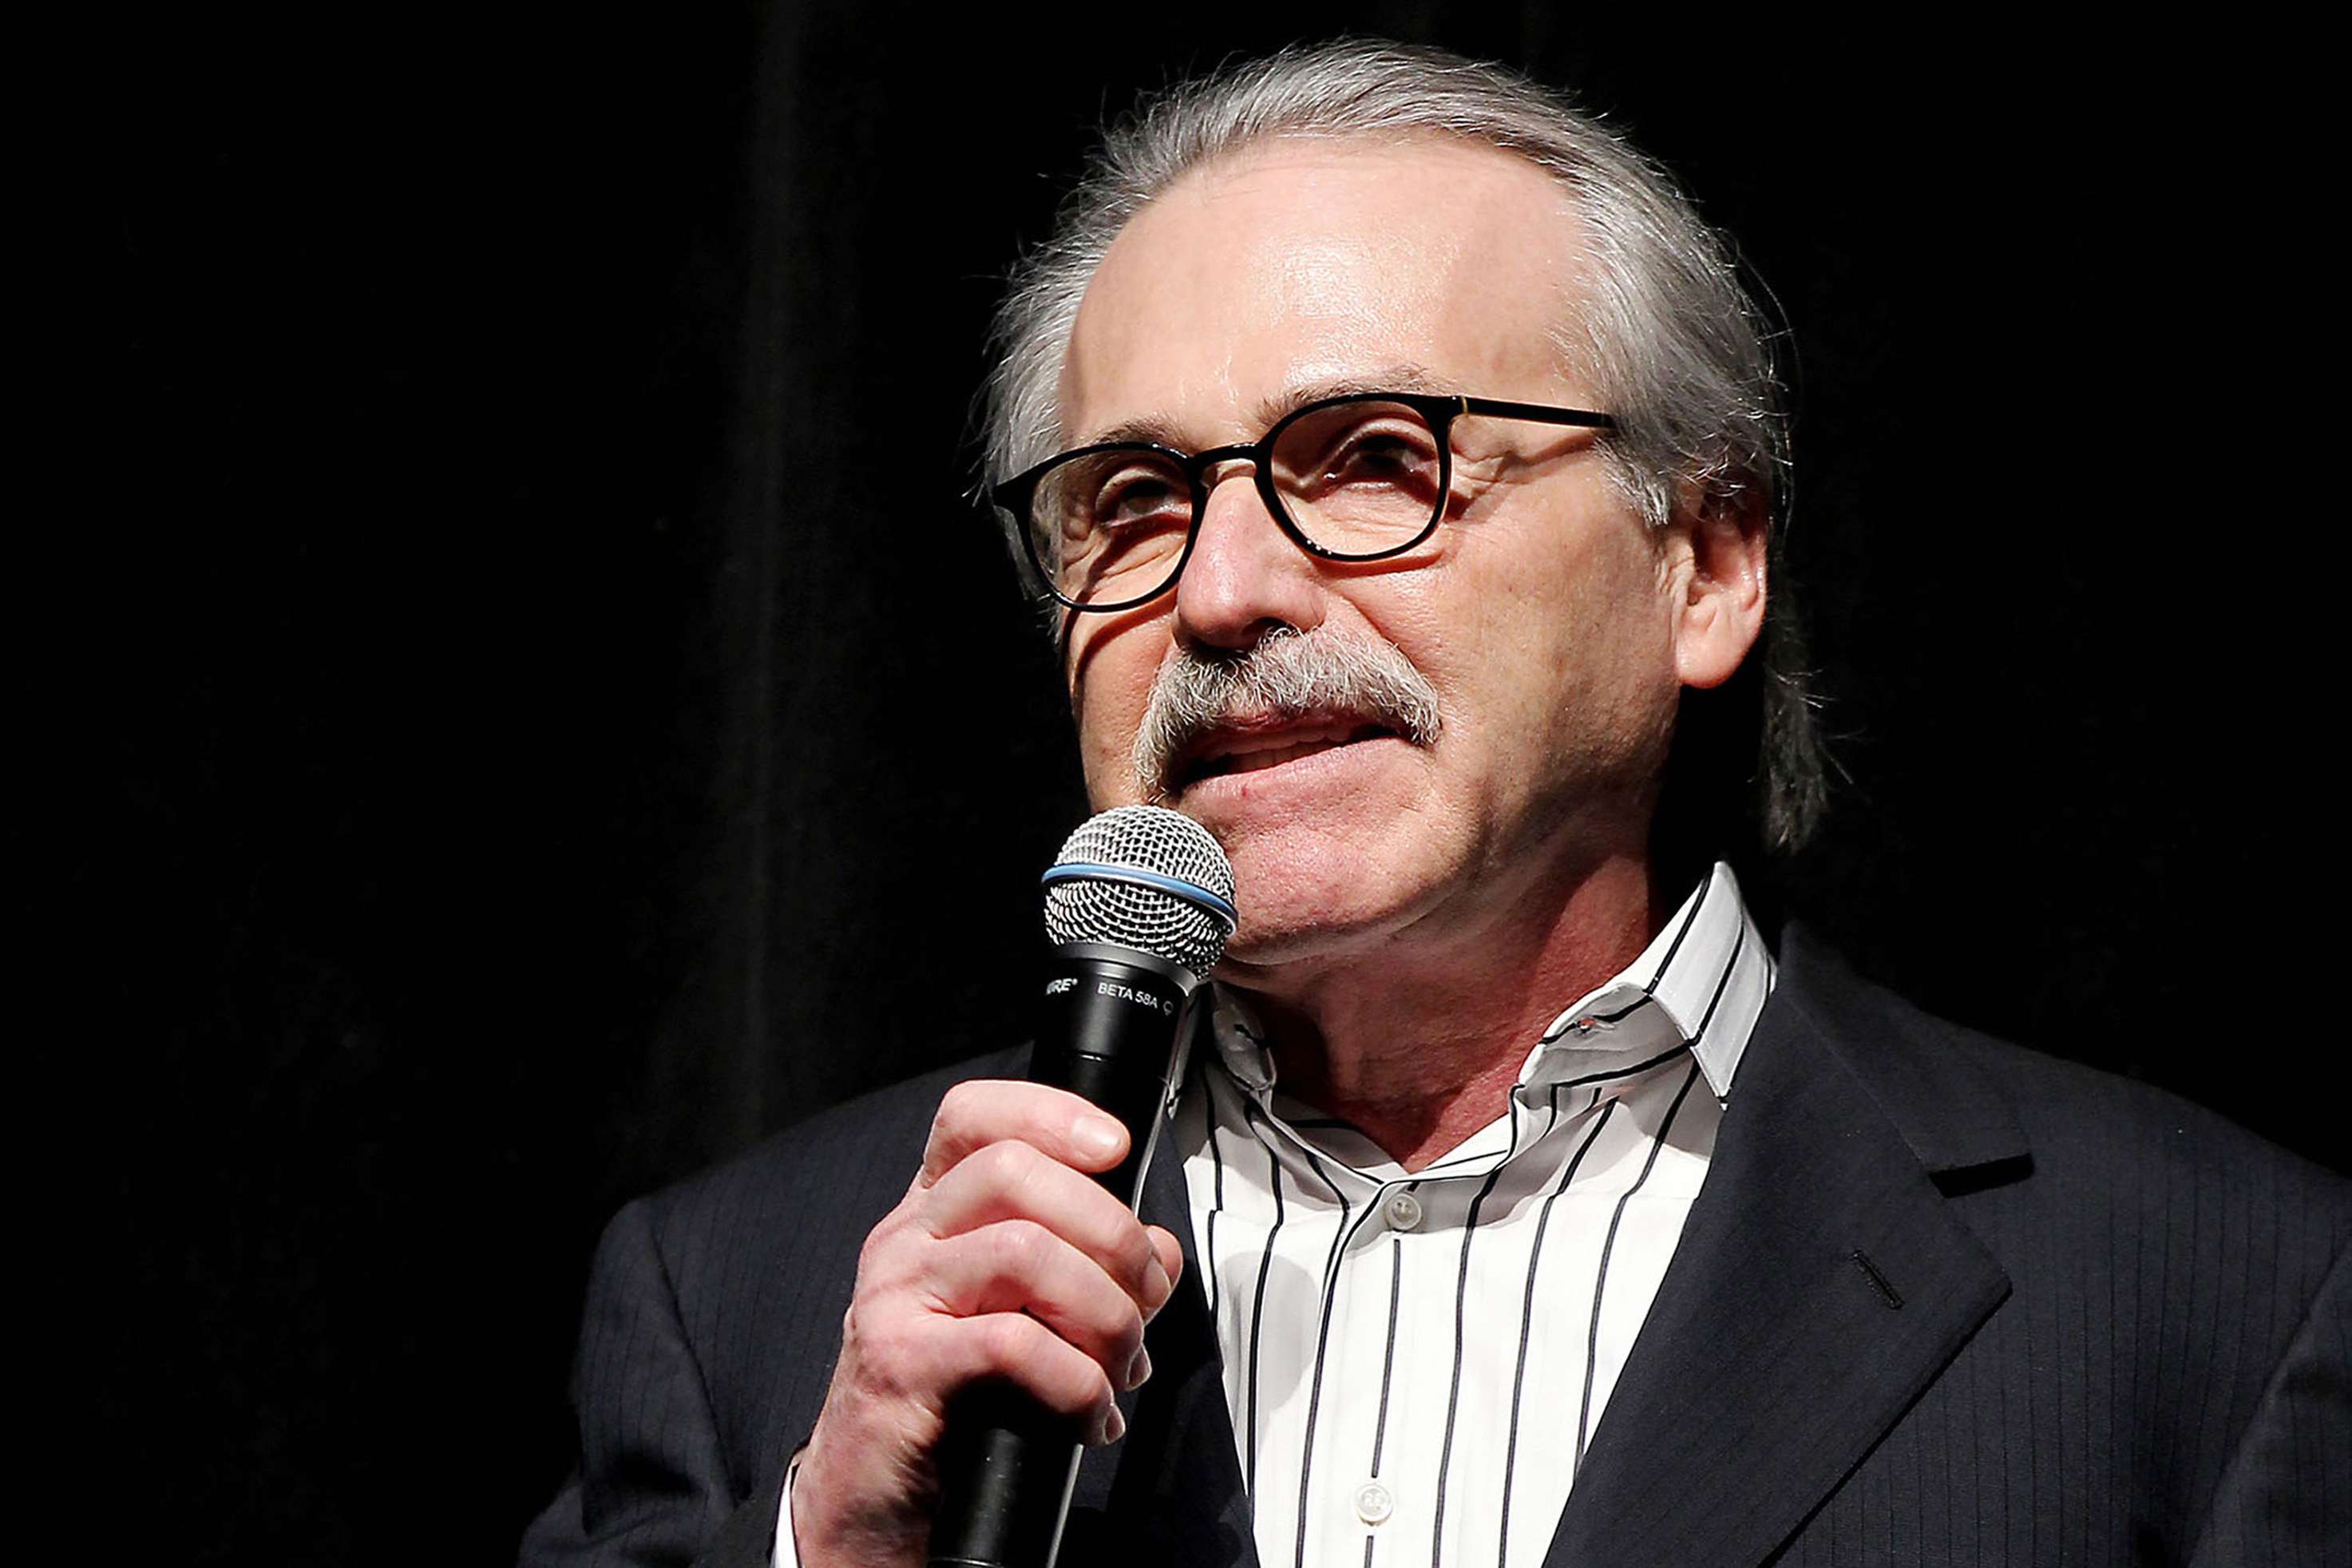 David Pecker’s Remarkable Trump Trial Testimony Is a Master Class in Media-Driven Power Politics (bloomberg.com)